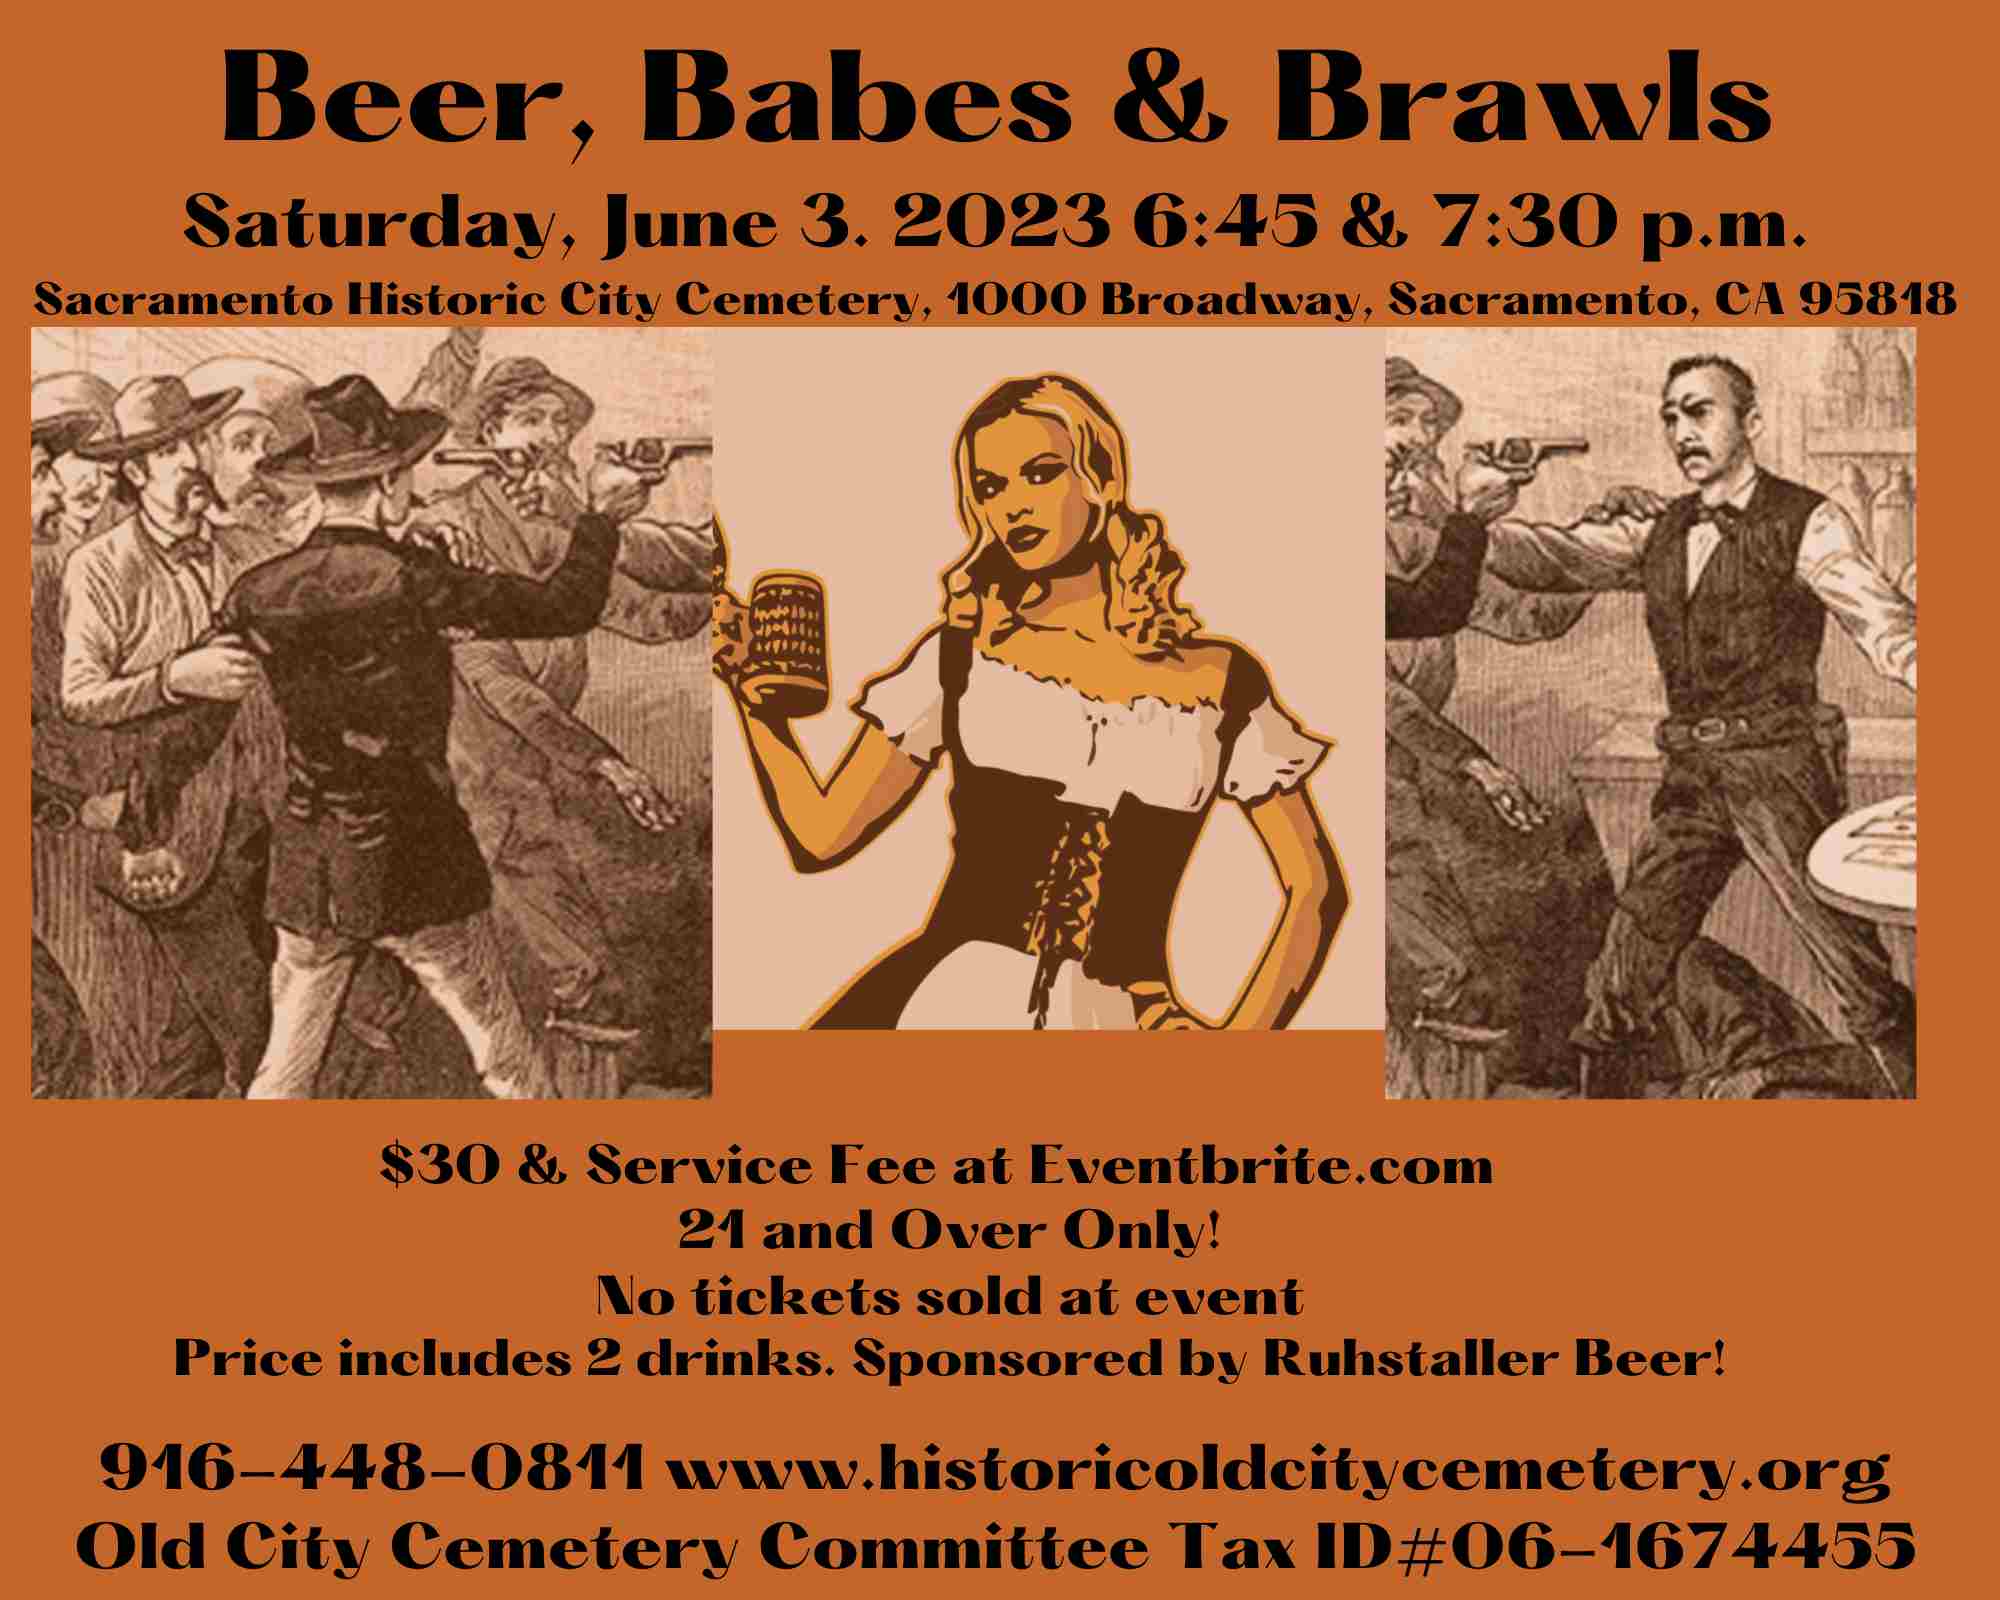 Beer Babes & Brawl Event at The Historic City Cemetery June 3, 2023. click on the link to get tickets